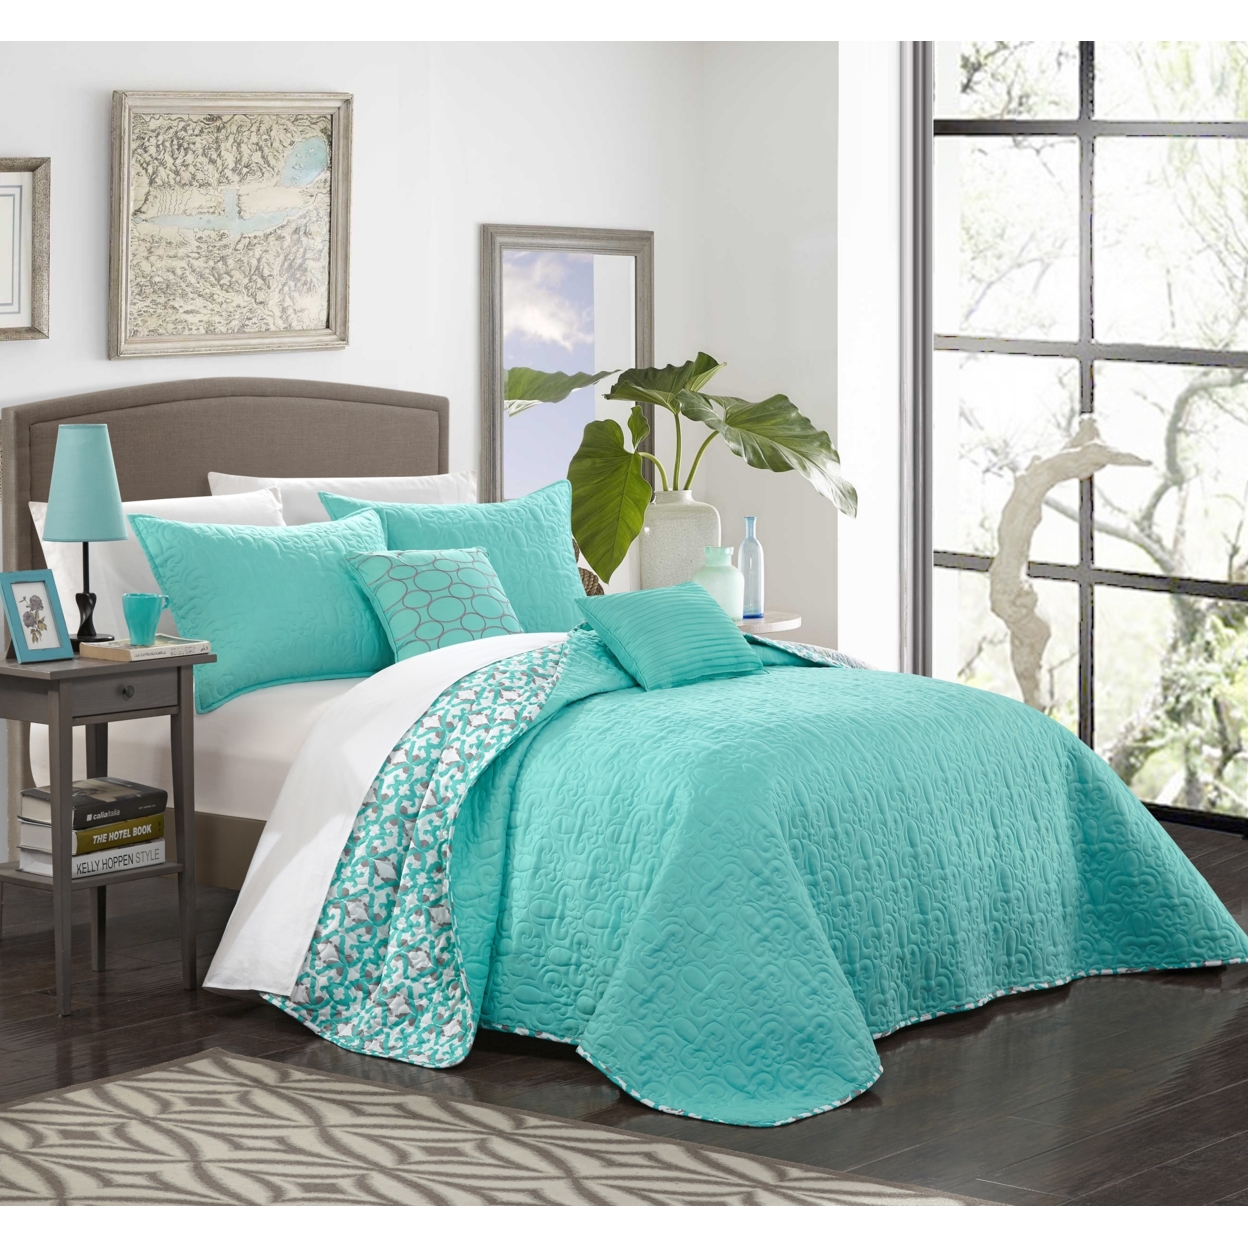 5 Piece Nalla Quilted Flor De Lis Patterned REVERSIBLE Printed Quilt Set, Shams And Decorative Pillows Included - Aqua, King